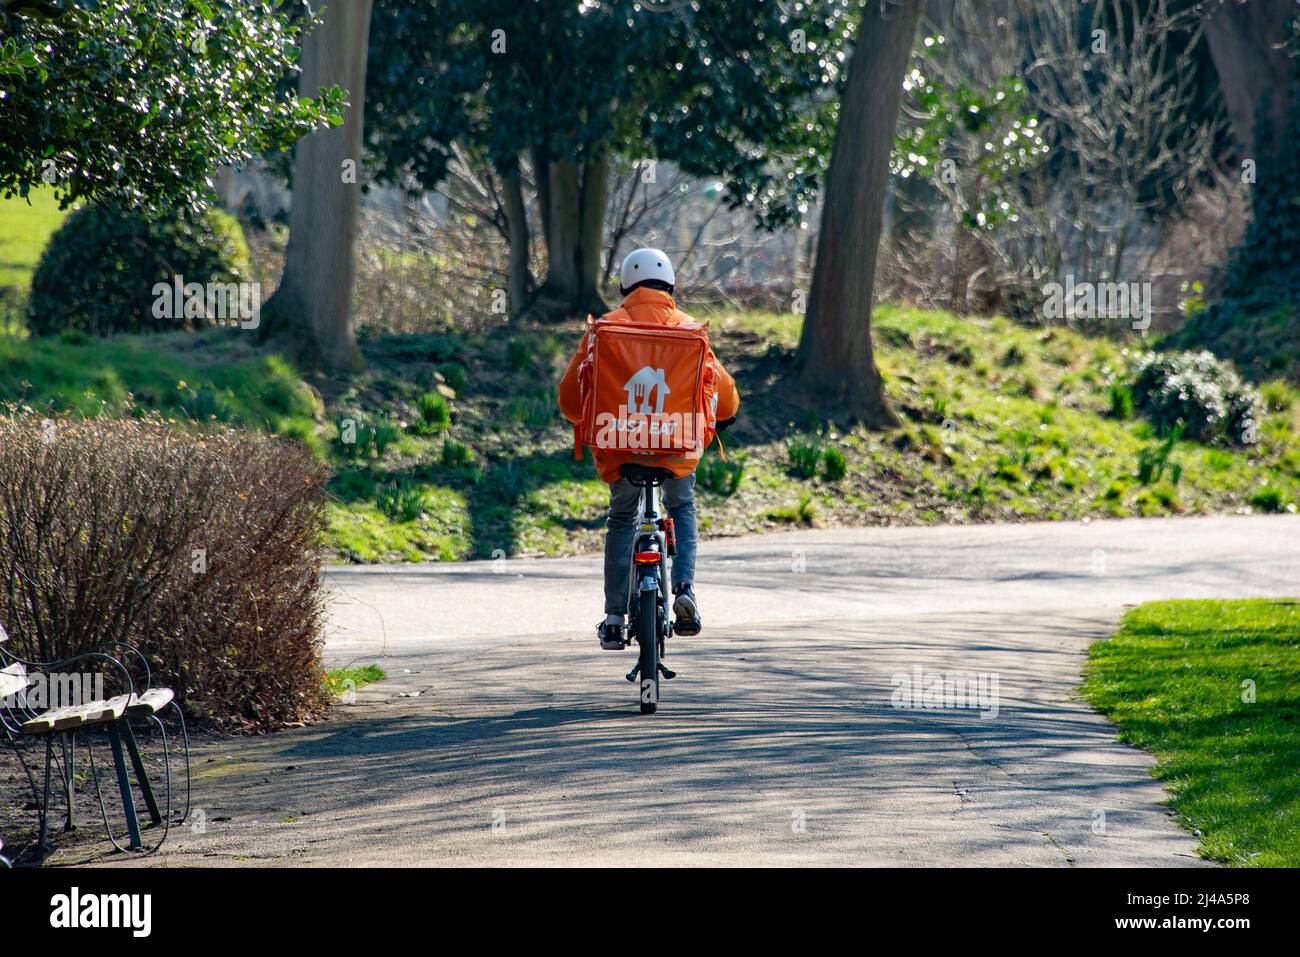 Just Eat delivery driver on a cycle, Victoria Park, London, UK. Stock Photo